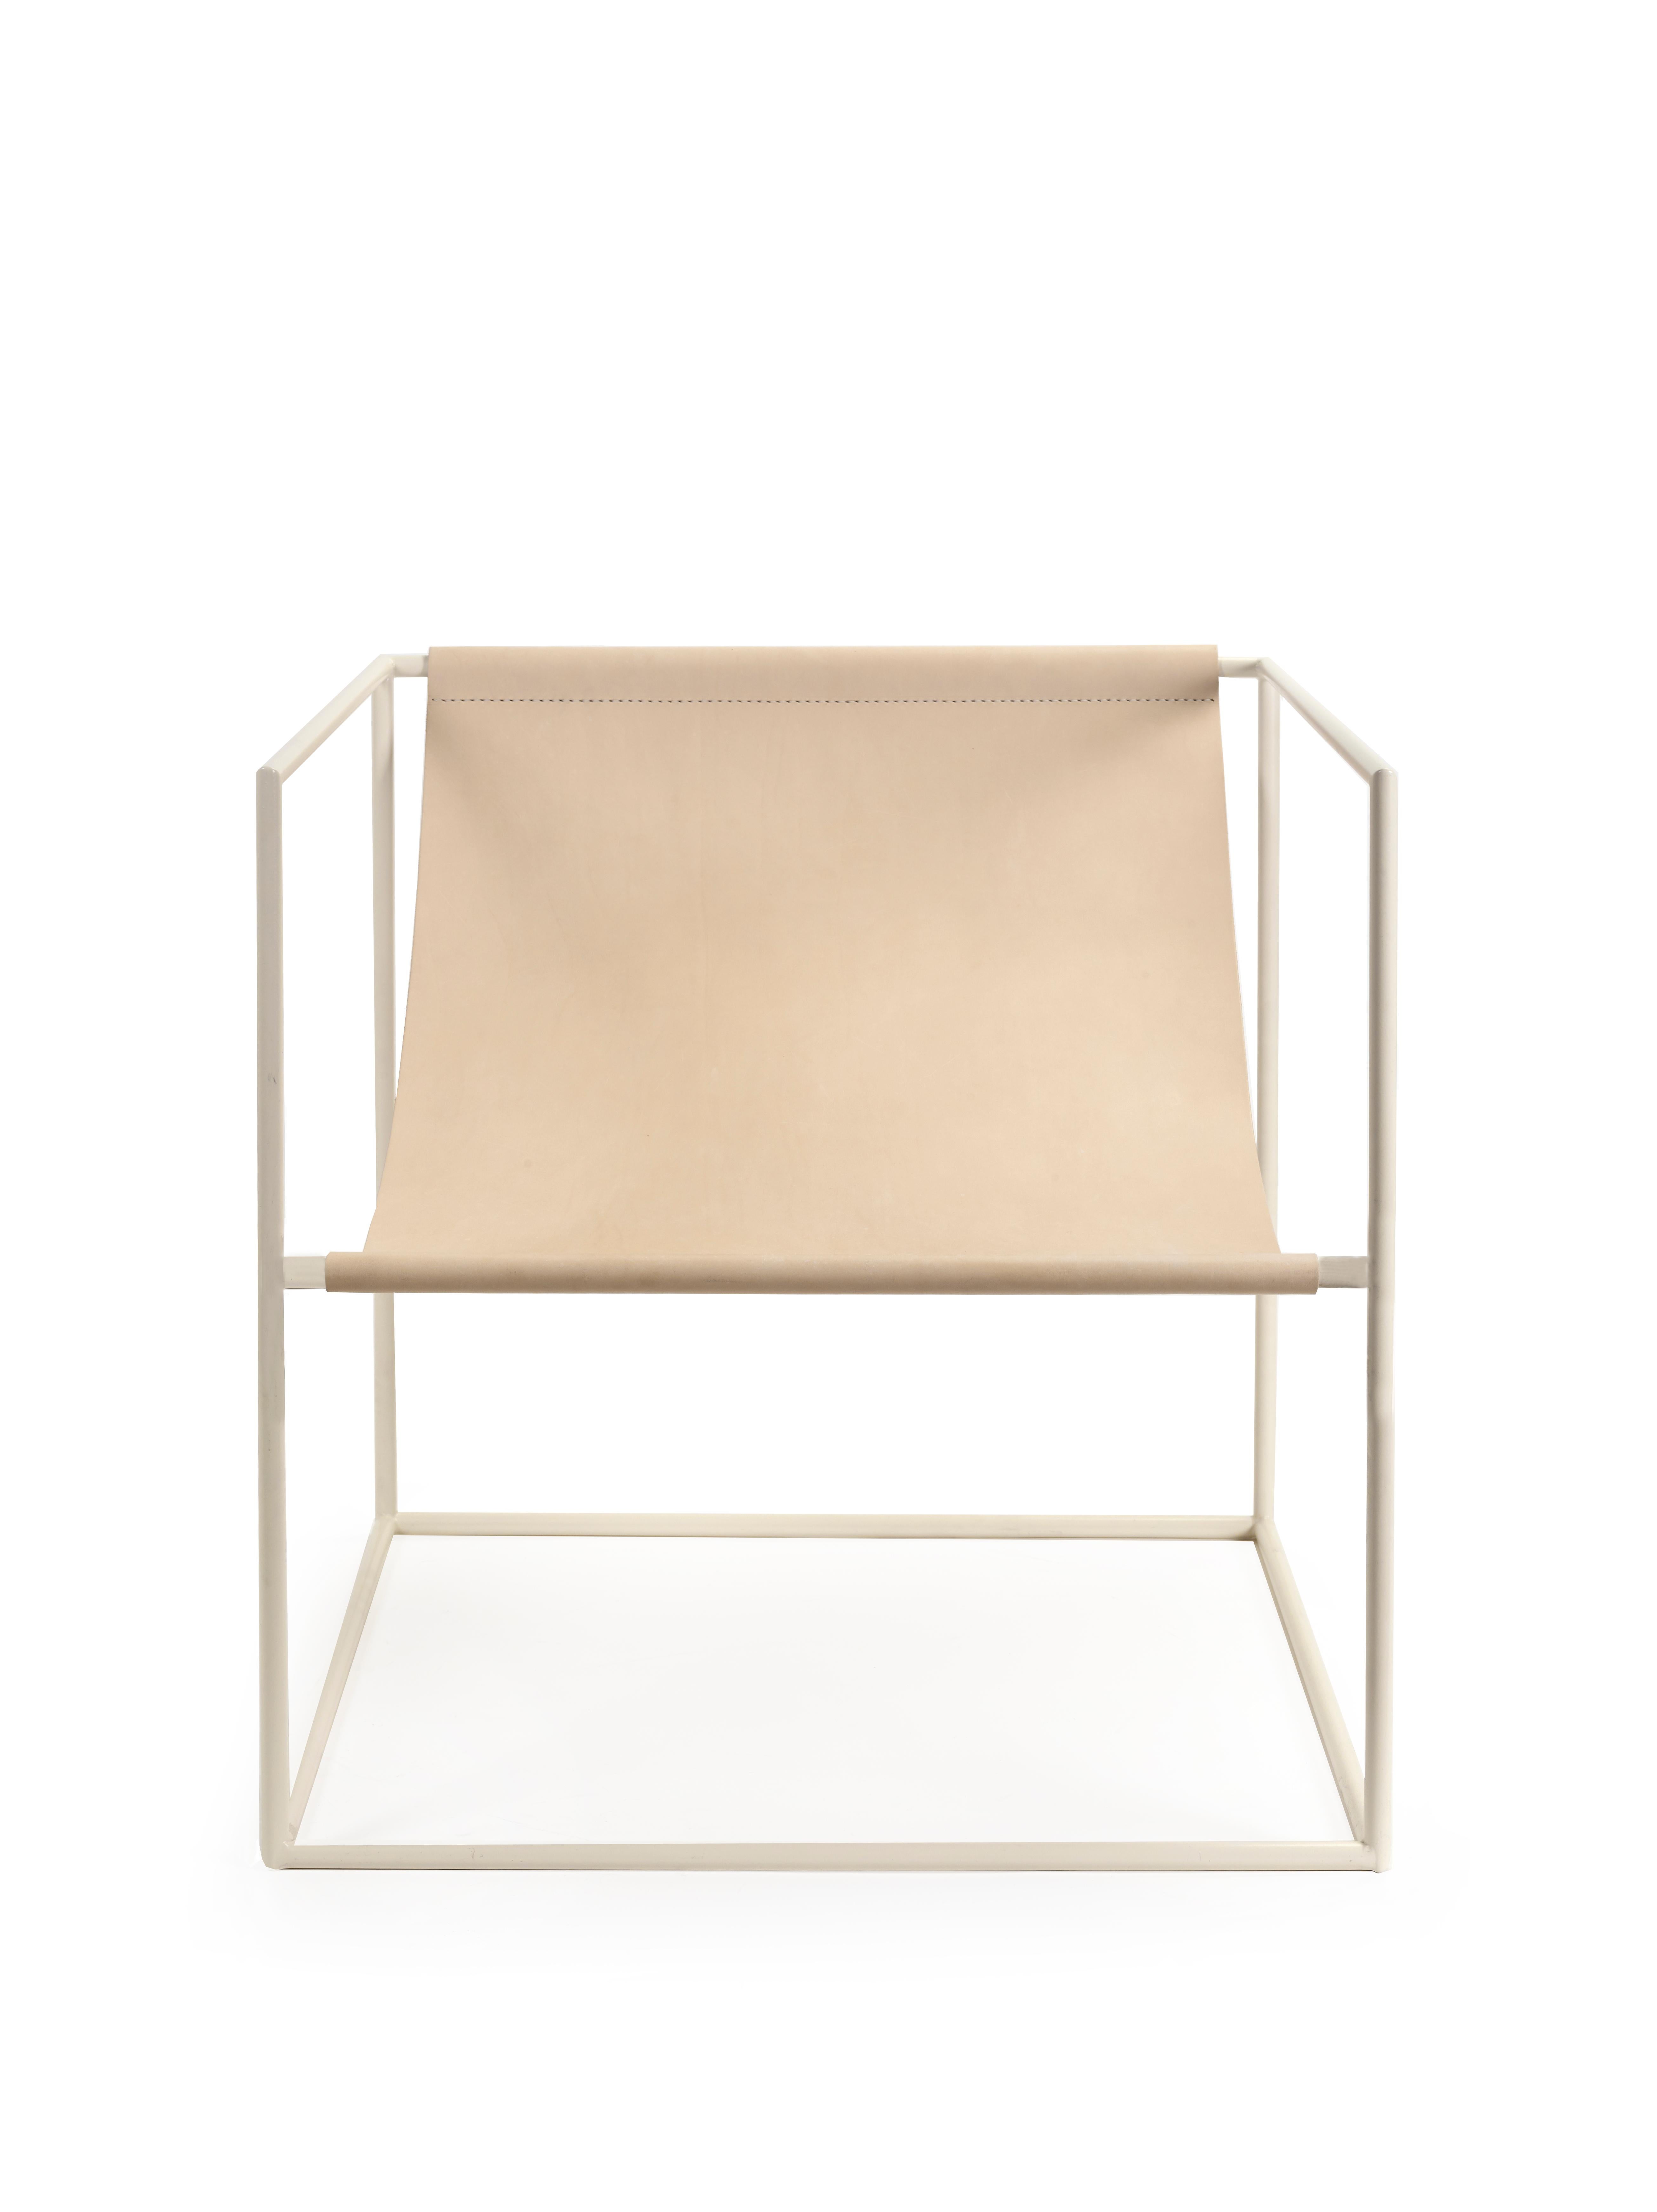 Solo Seat Contemporary Seating
by Muller Van severen

Model: white - frame + leather - seat (V9018022)
Dimensions: H. 61 cm x 62 cm x 62 cm (SH 34 cm)

Unlike a massive sofa that sheaths a part of the interior, the duo seat ensures lightness and